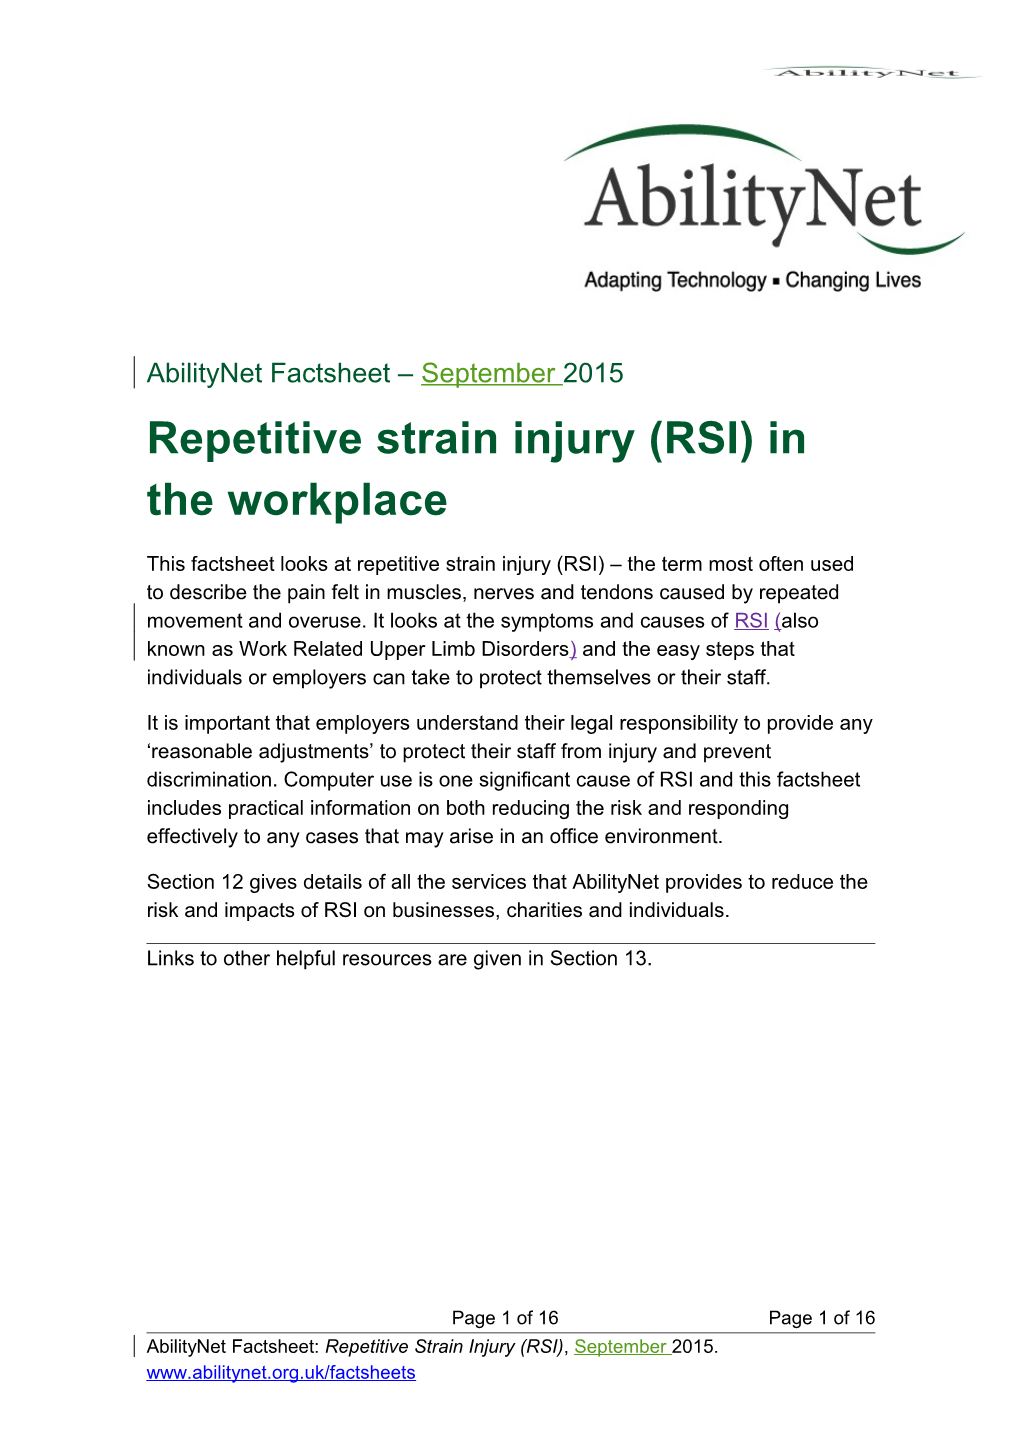 Repetitive Strain Injury (RSI) in the Workplace